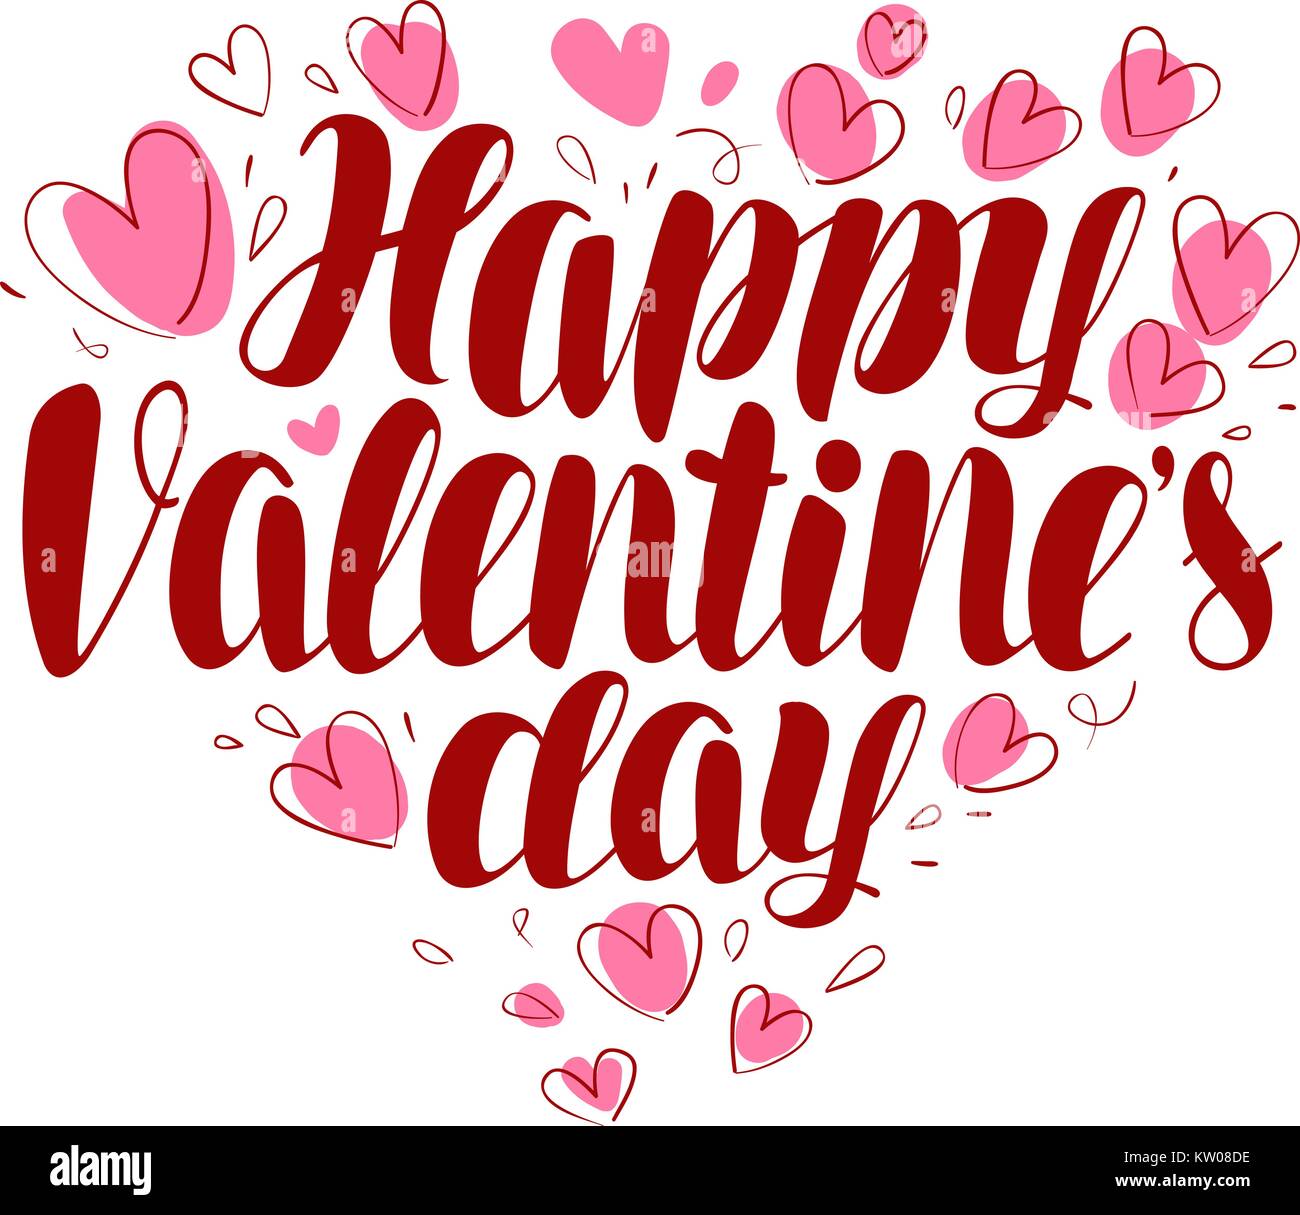 Happy Valentine's day, greeting card or banner. Handwritten lettering, calligraphy vector illustration Stock Vector